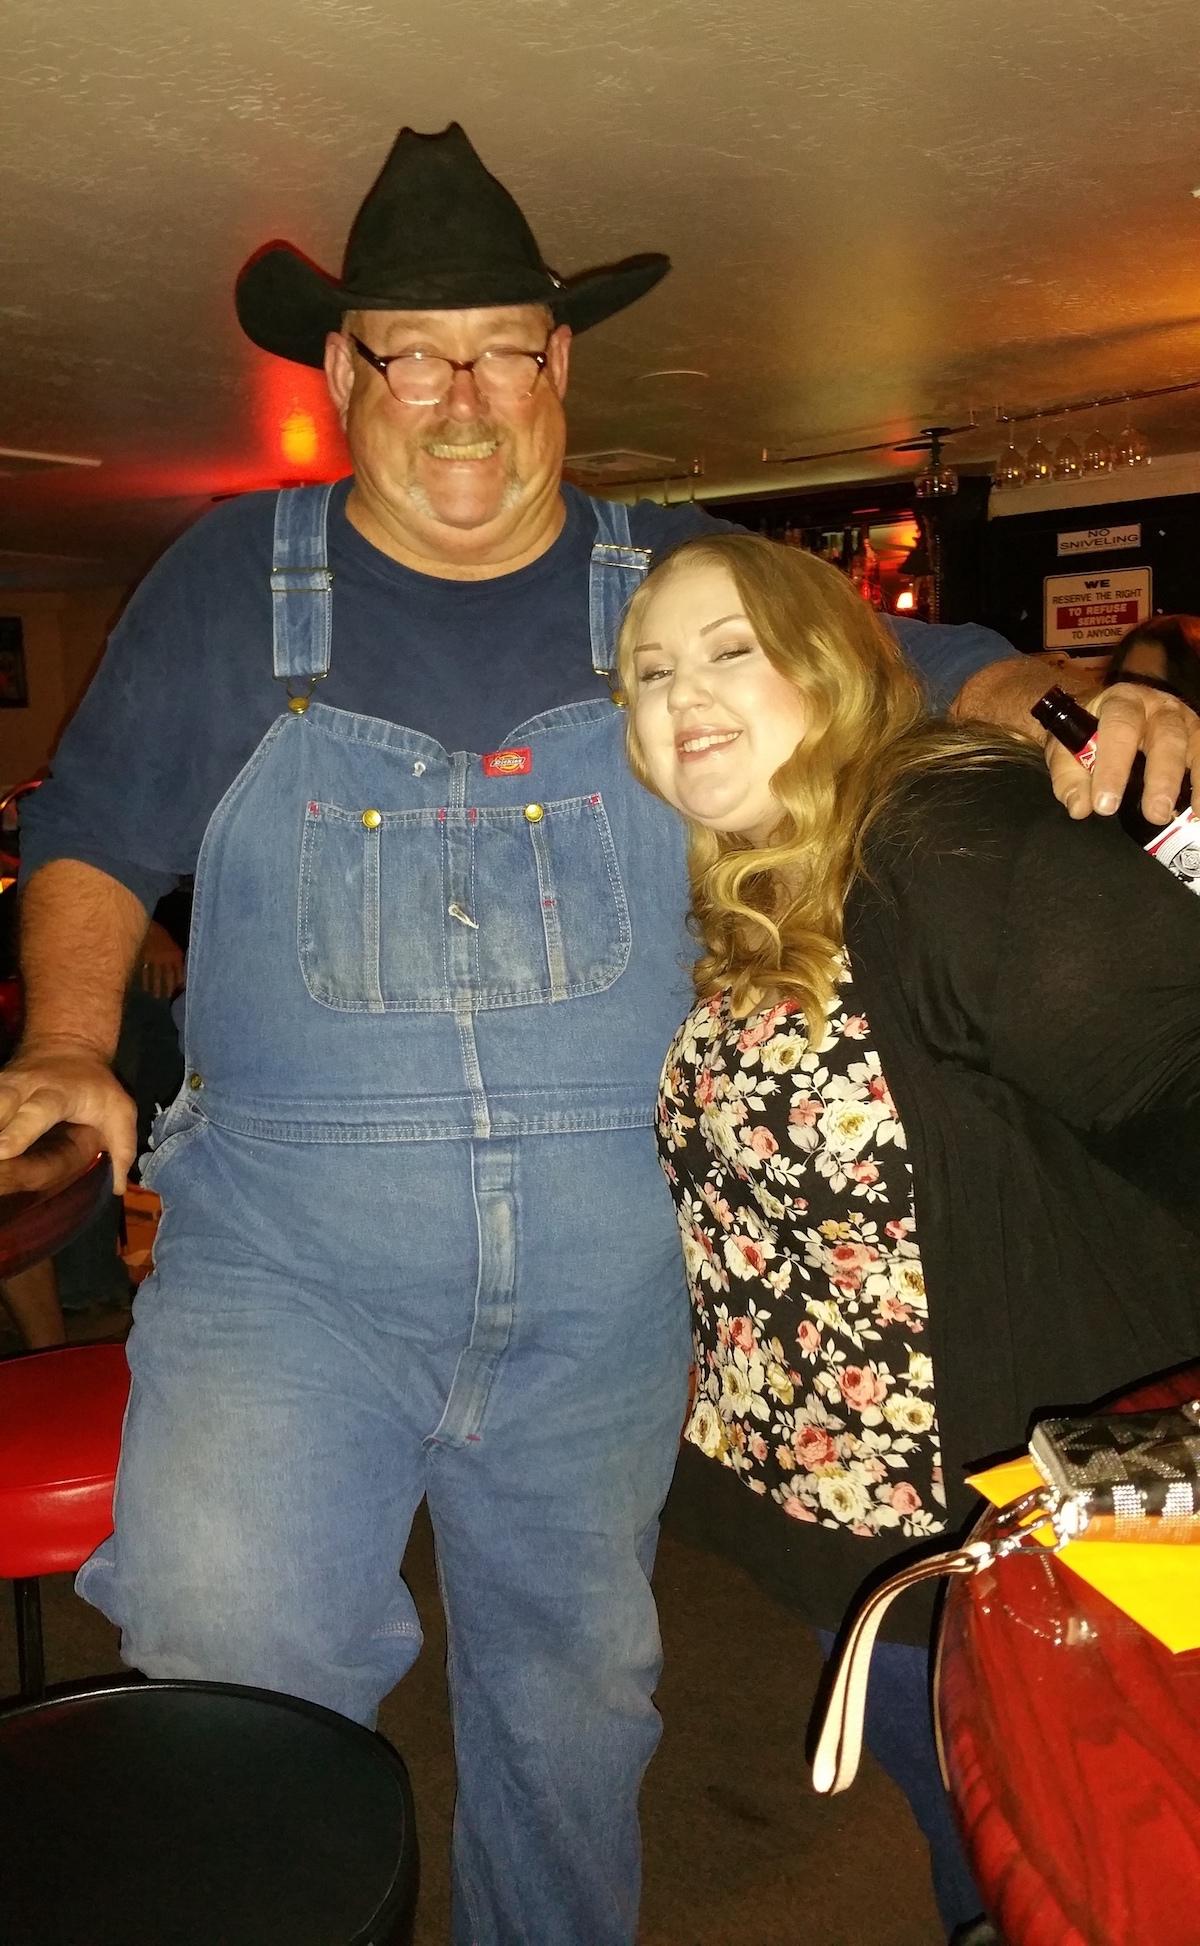 Ms. Bishop with her father. (Courtesy of <a href="https://www.instagram.com/ketohalfasser/">Chelsey Bishop</a>)